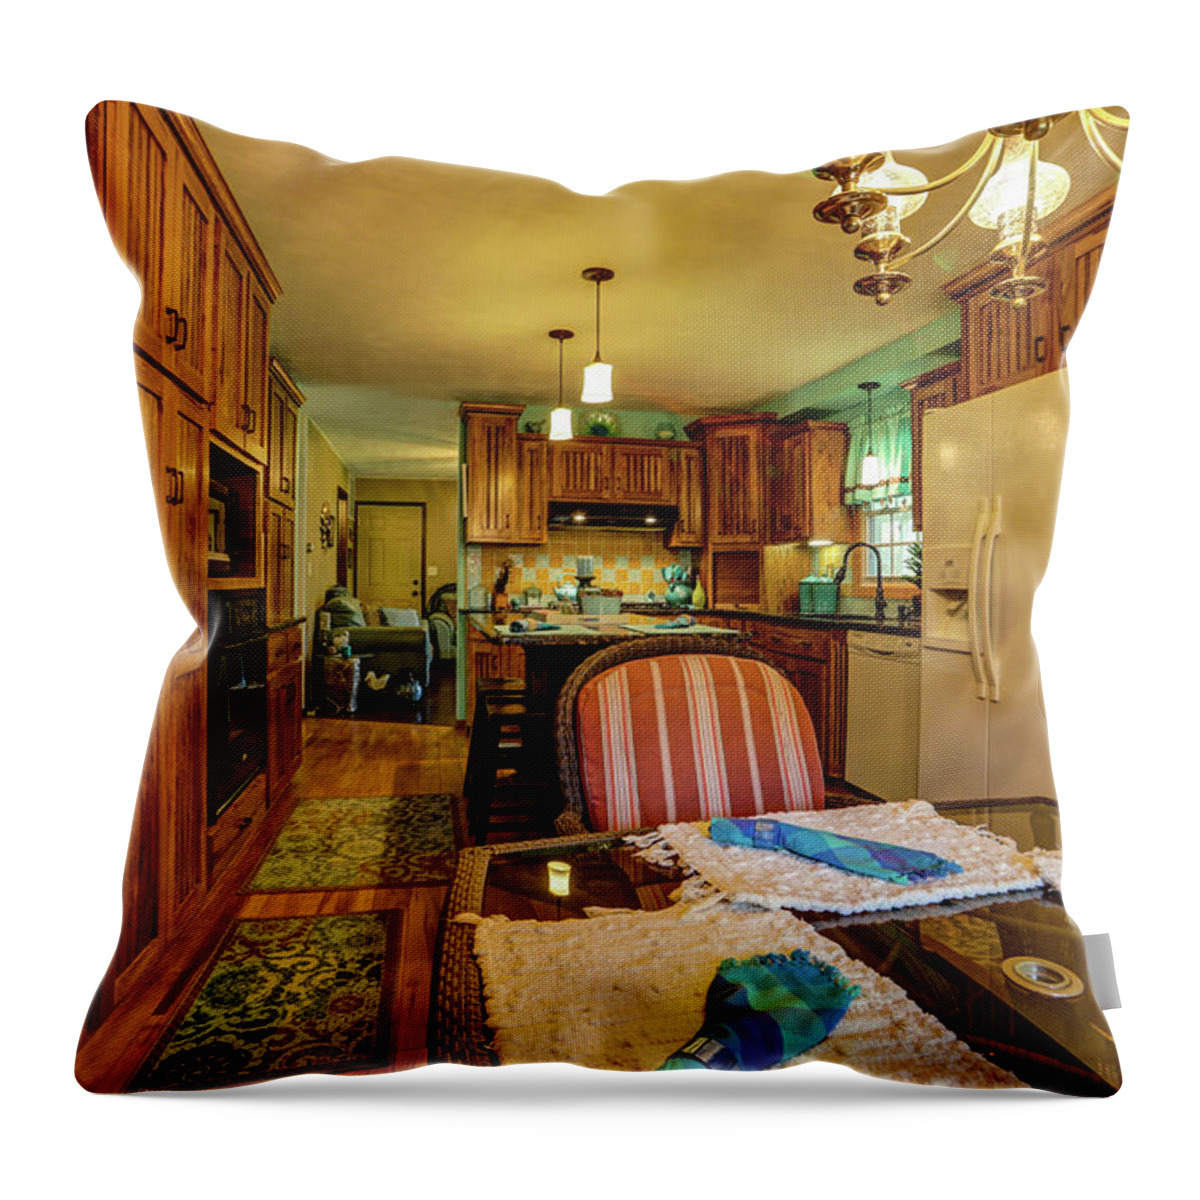 Real Estate Photography Throw Pillow featuring the photograph Mt Vernon Kitchen by Jeff Kurtz